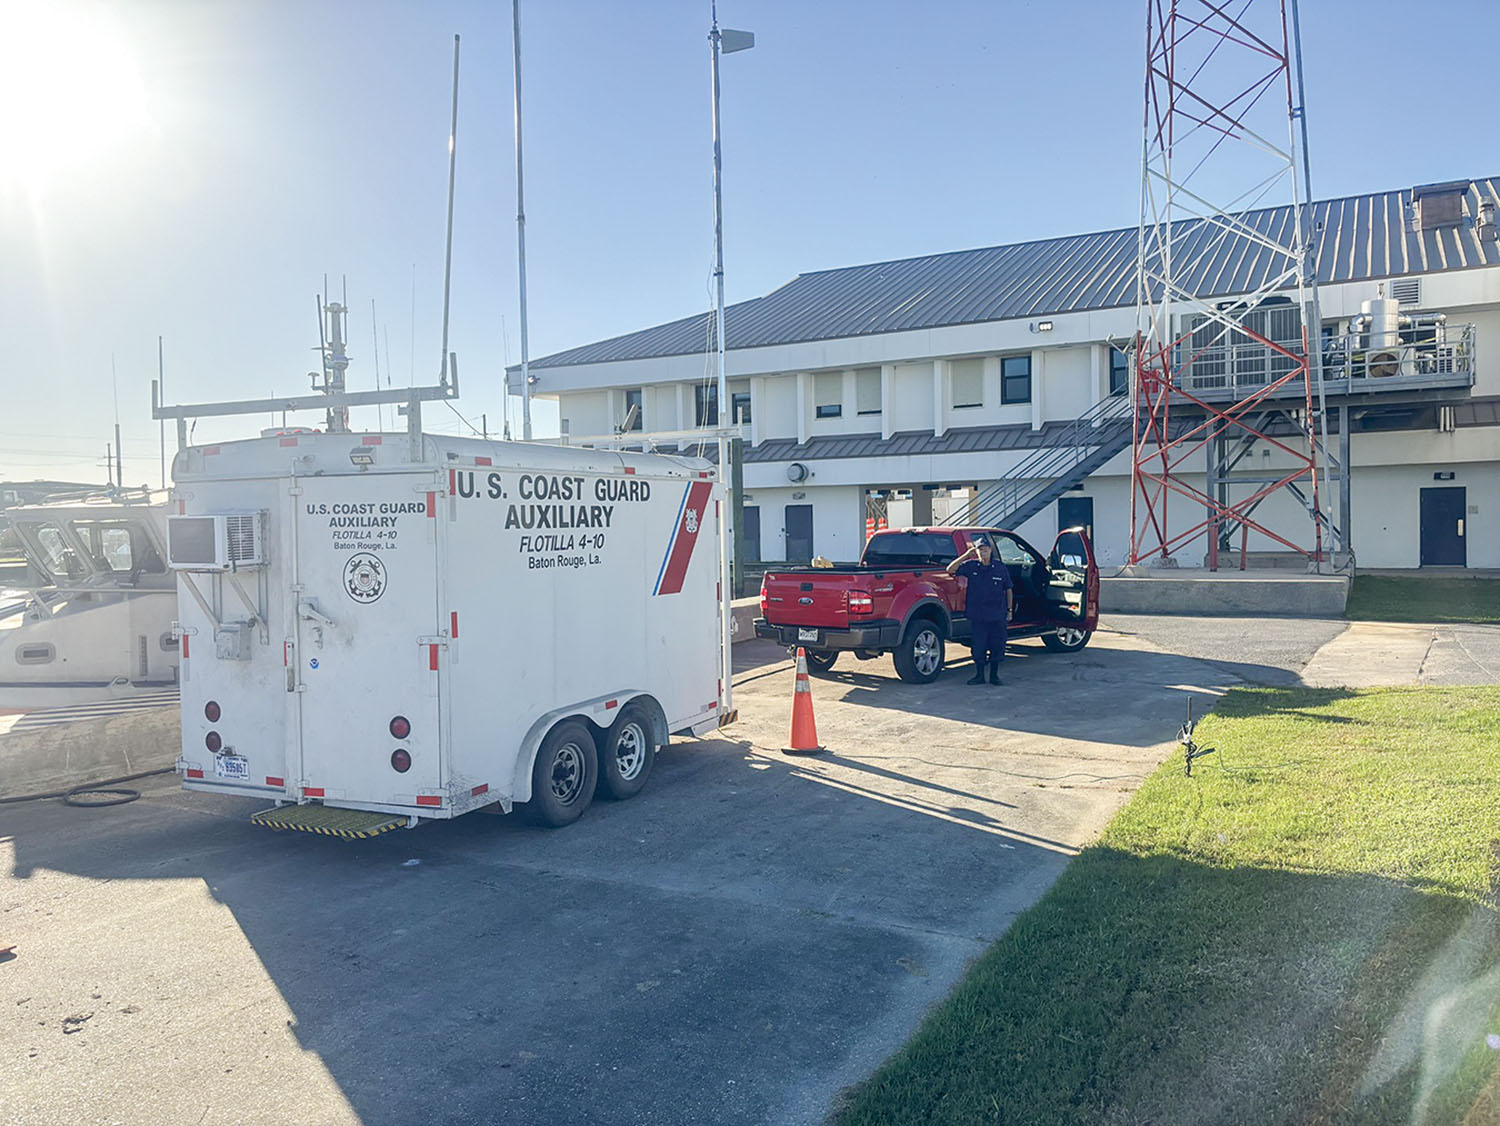 The Auxiliary Communications Trailer was moved to Coast Guard Station Venice to monitor radio communications during an outage of Rescue 21’s capabilities. (Photo courtesy of Cedric Walker)